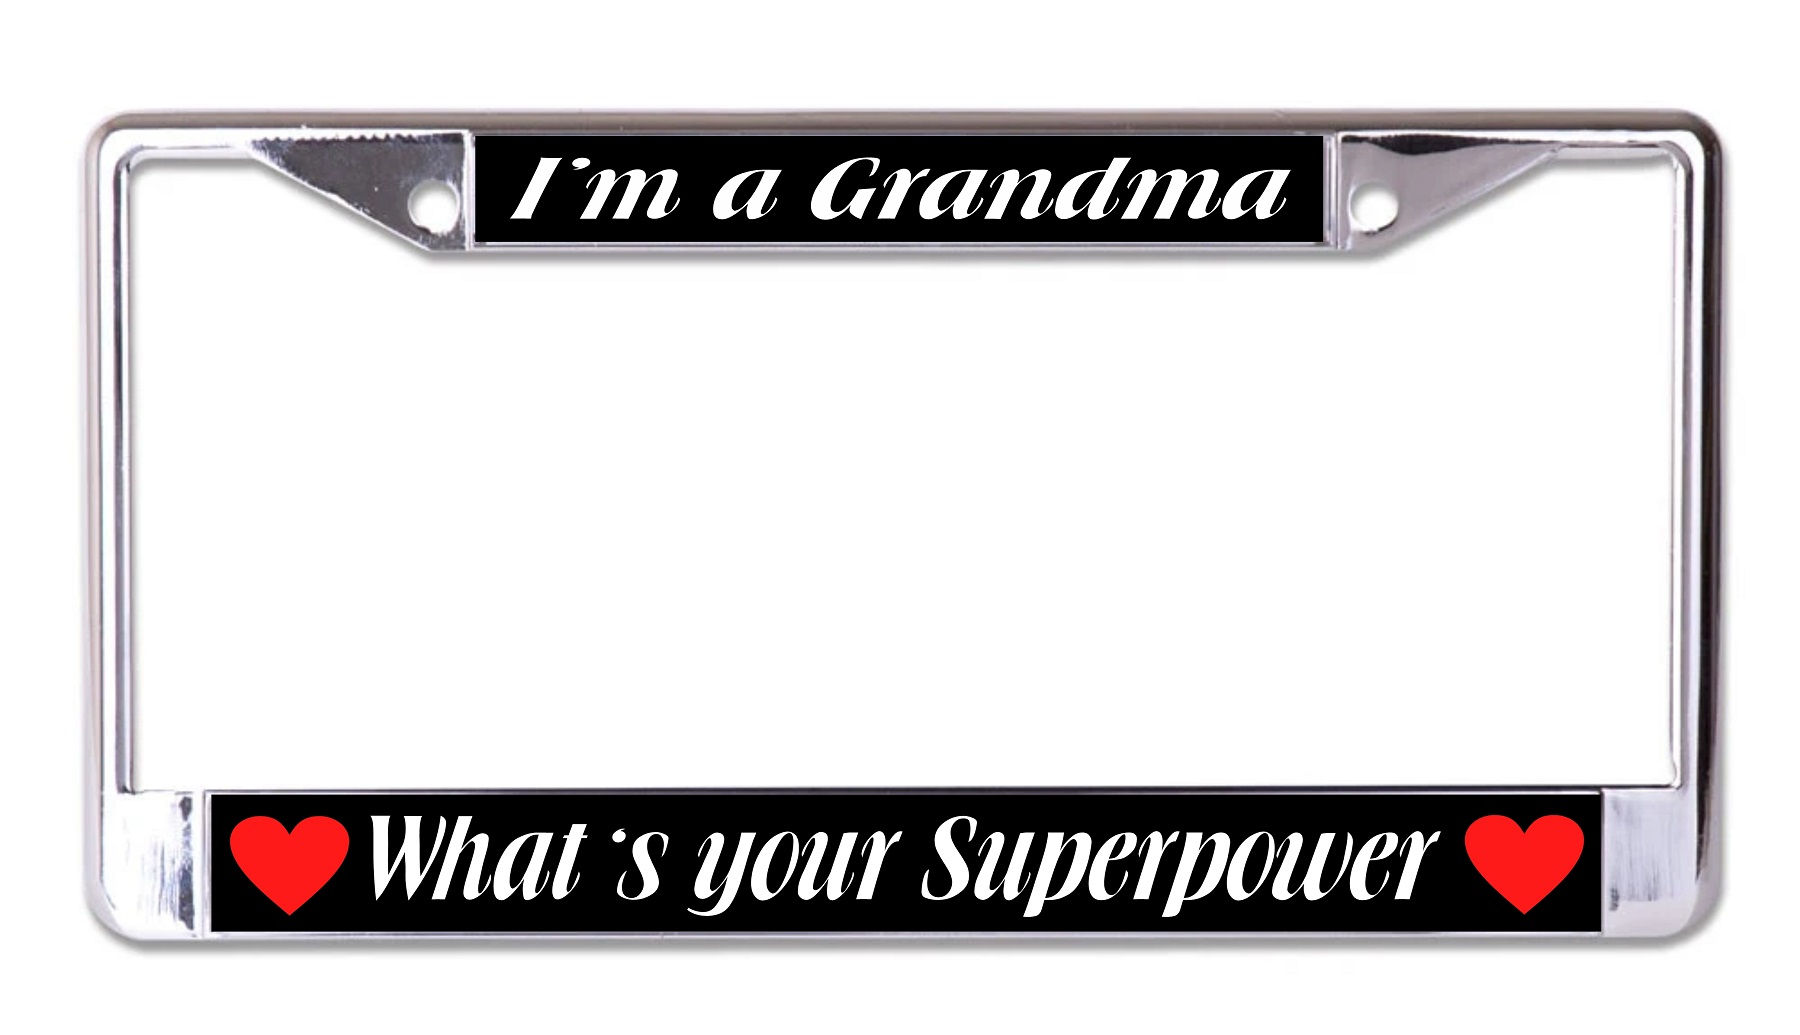 I'm A Grandma What's Your Superpower Chrome License Plate FRAME